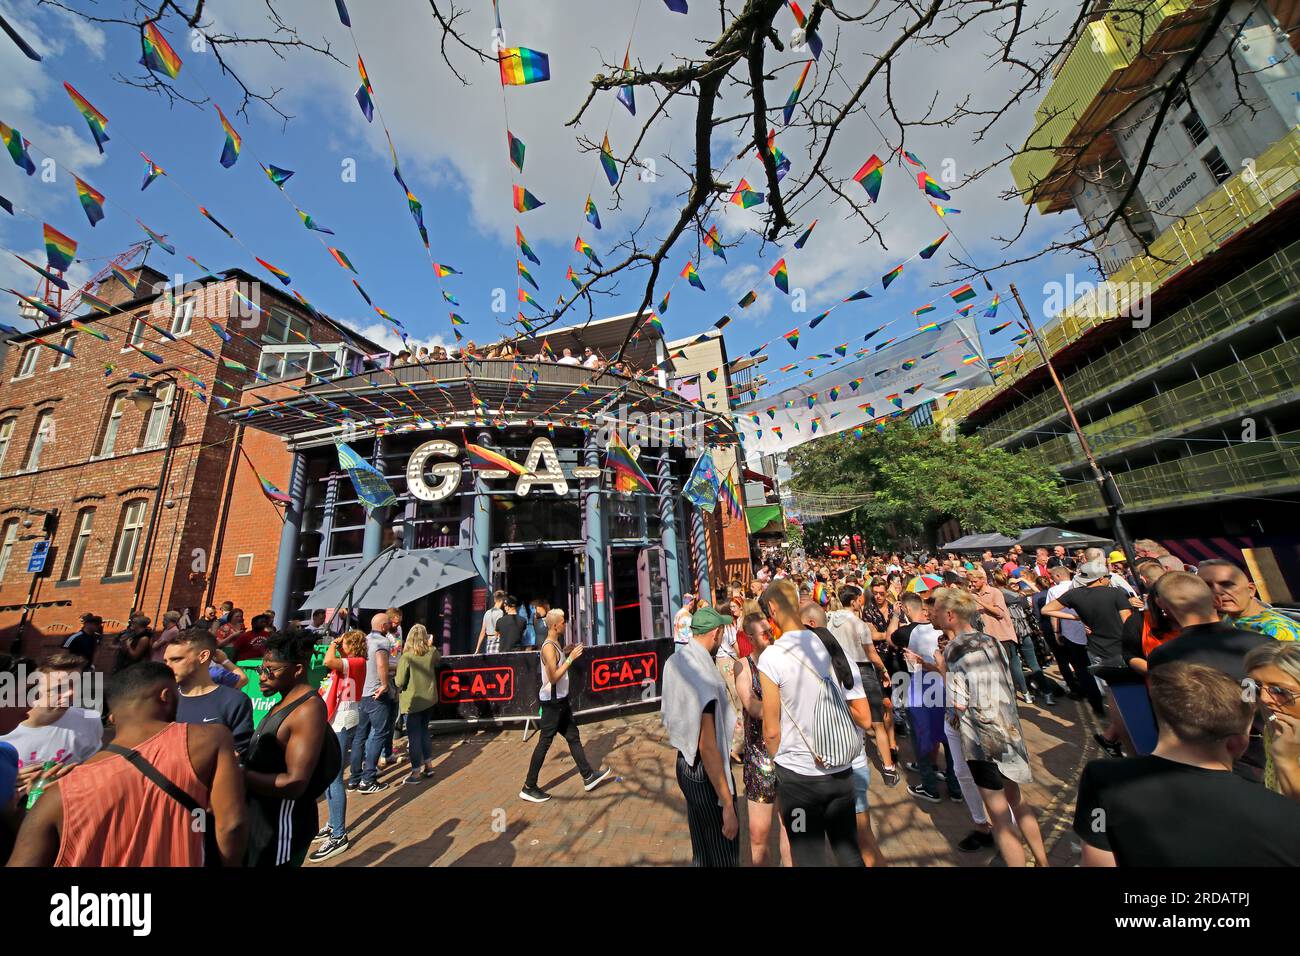 The Gay Bar enjoying Manchester Pride Festival, August bank holiday at the Gay Village, Canal St, Manchester, England, UK, M1 6JB Stock Photo